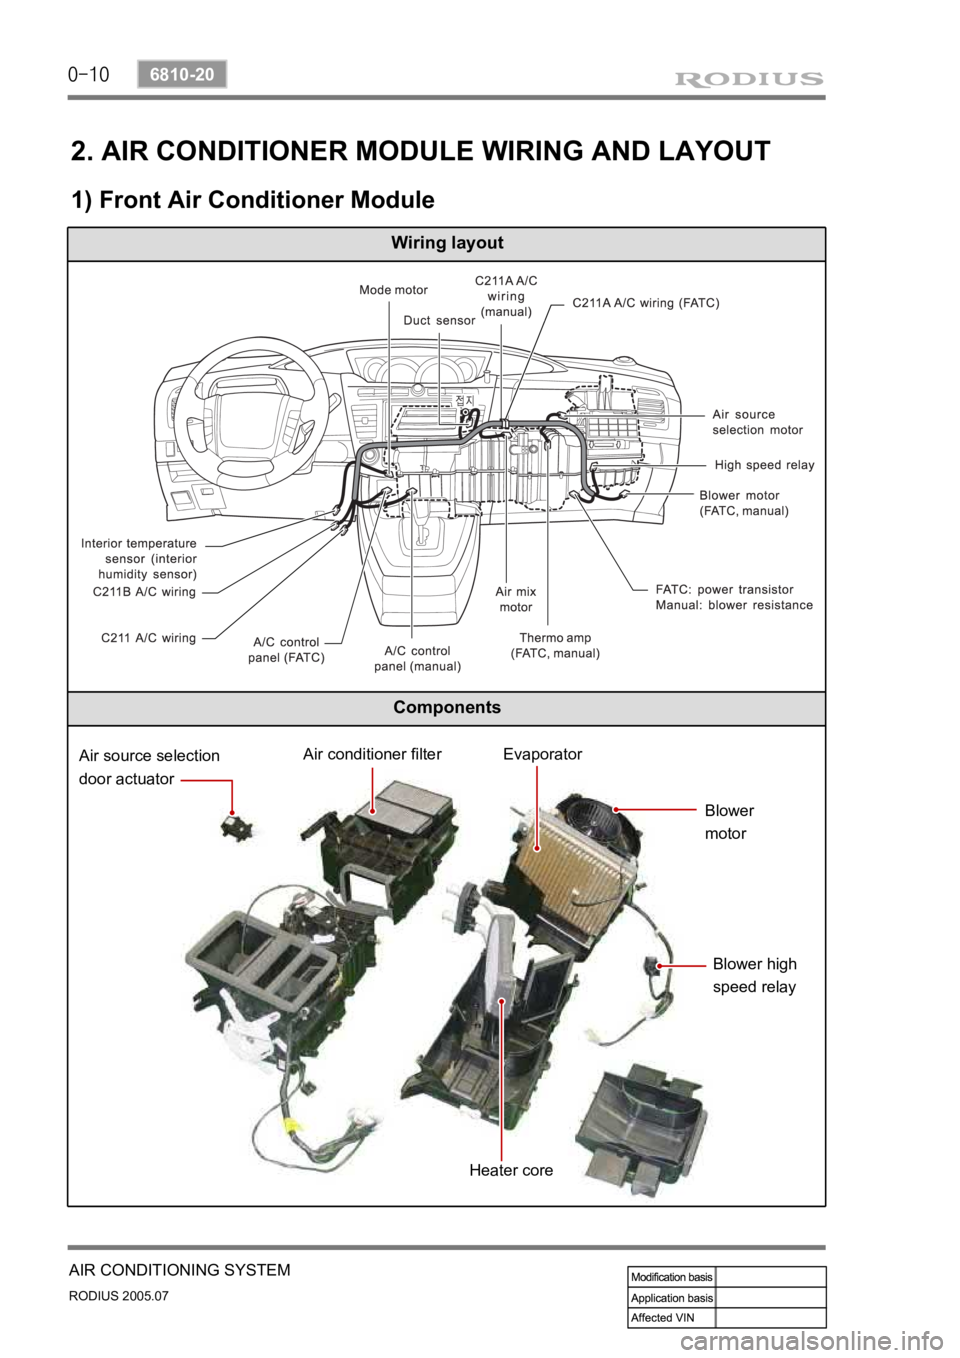 SSANGYONG RODIUS 2005  Service Manual 0-10
RODIUS 2005.07
6810-20 
AIR CONDITIONING SYSTEM
2. AIR CONDITIONER MODULE WIRING AND LAYOUT
1) Front Air Conditioner Module
Wiring layout
Components
Air source selection
door actuatorAir conditio